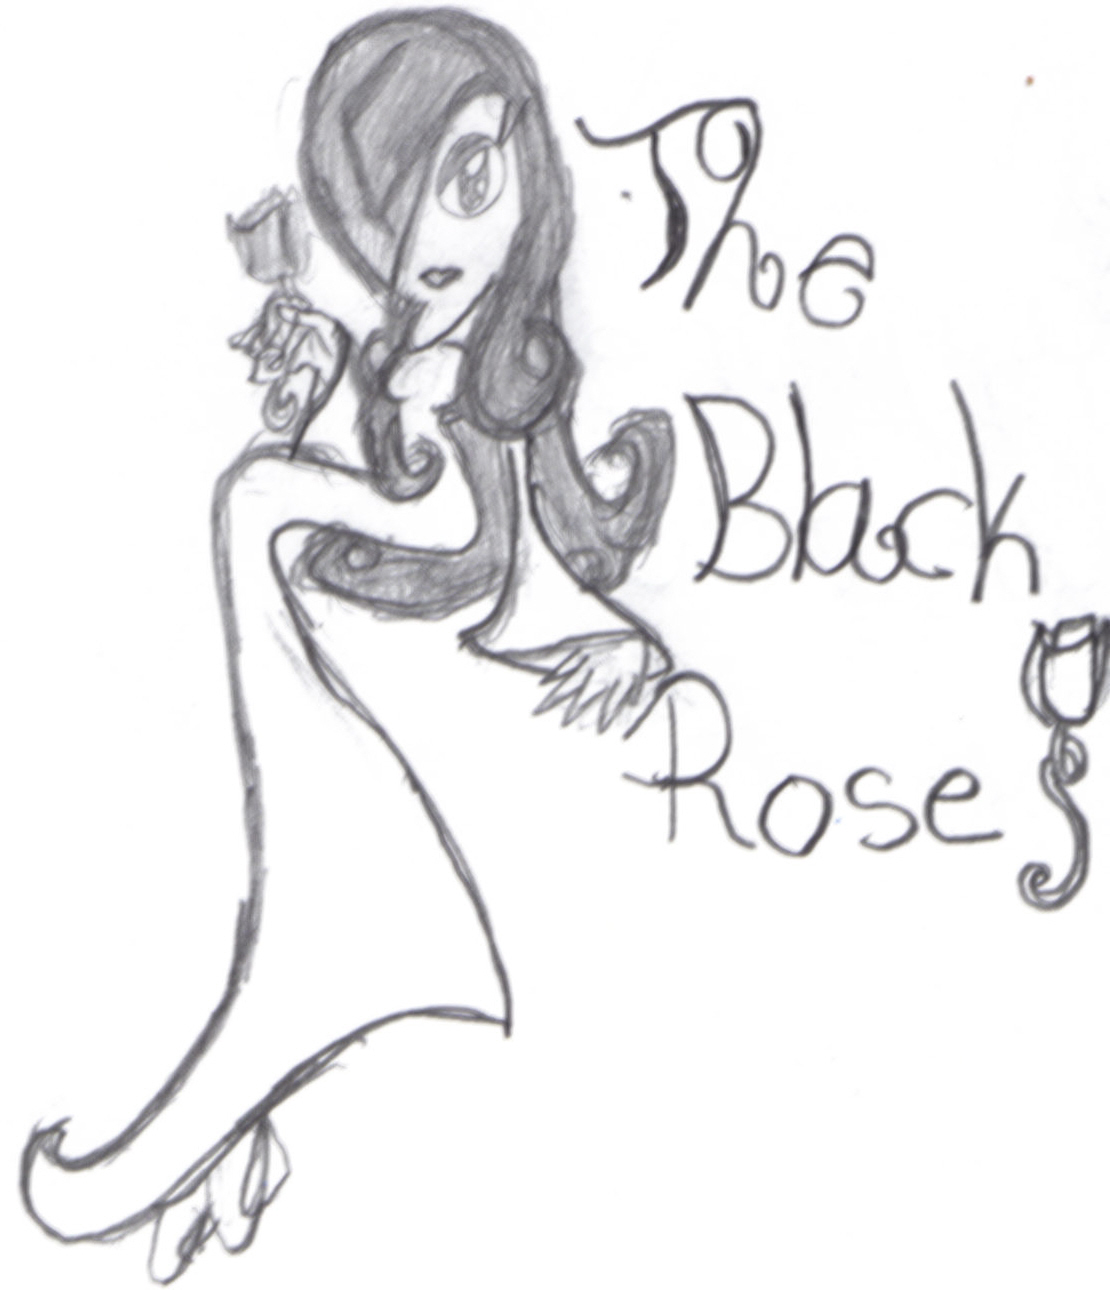 The Black Rose Spirit by LilAngelicBaby